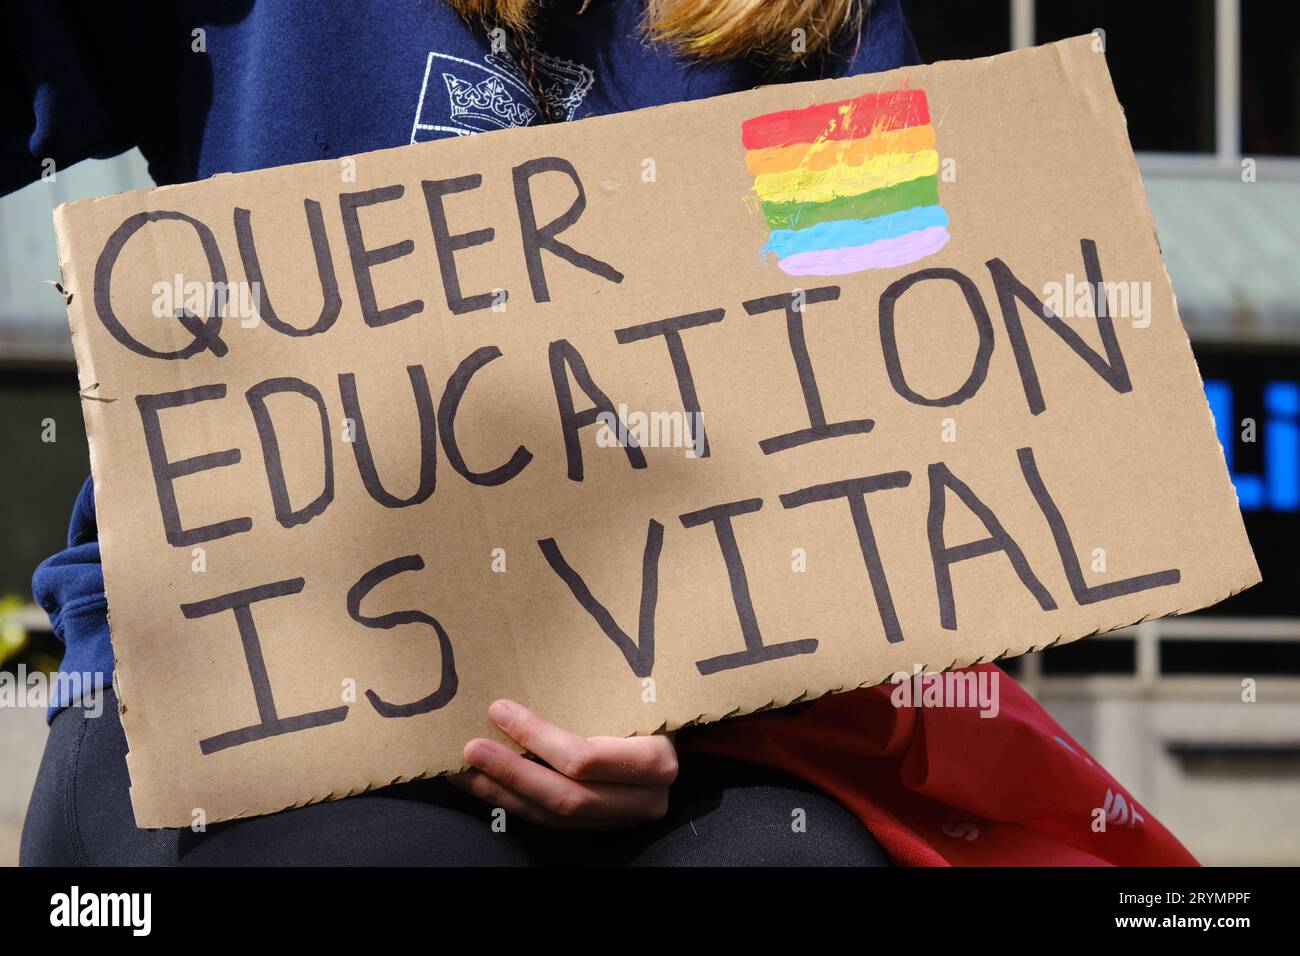 “Queer education is Vital” message on sign Stock Photo